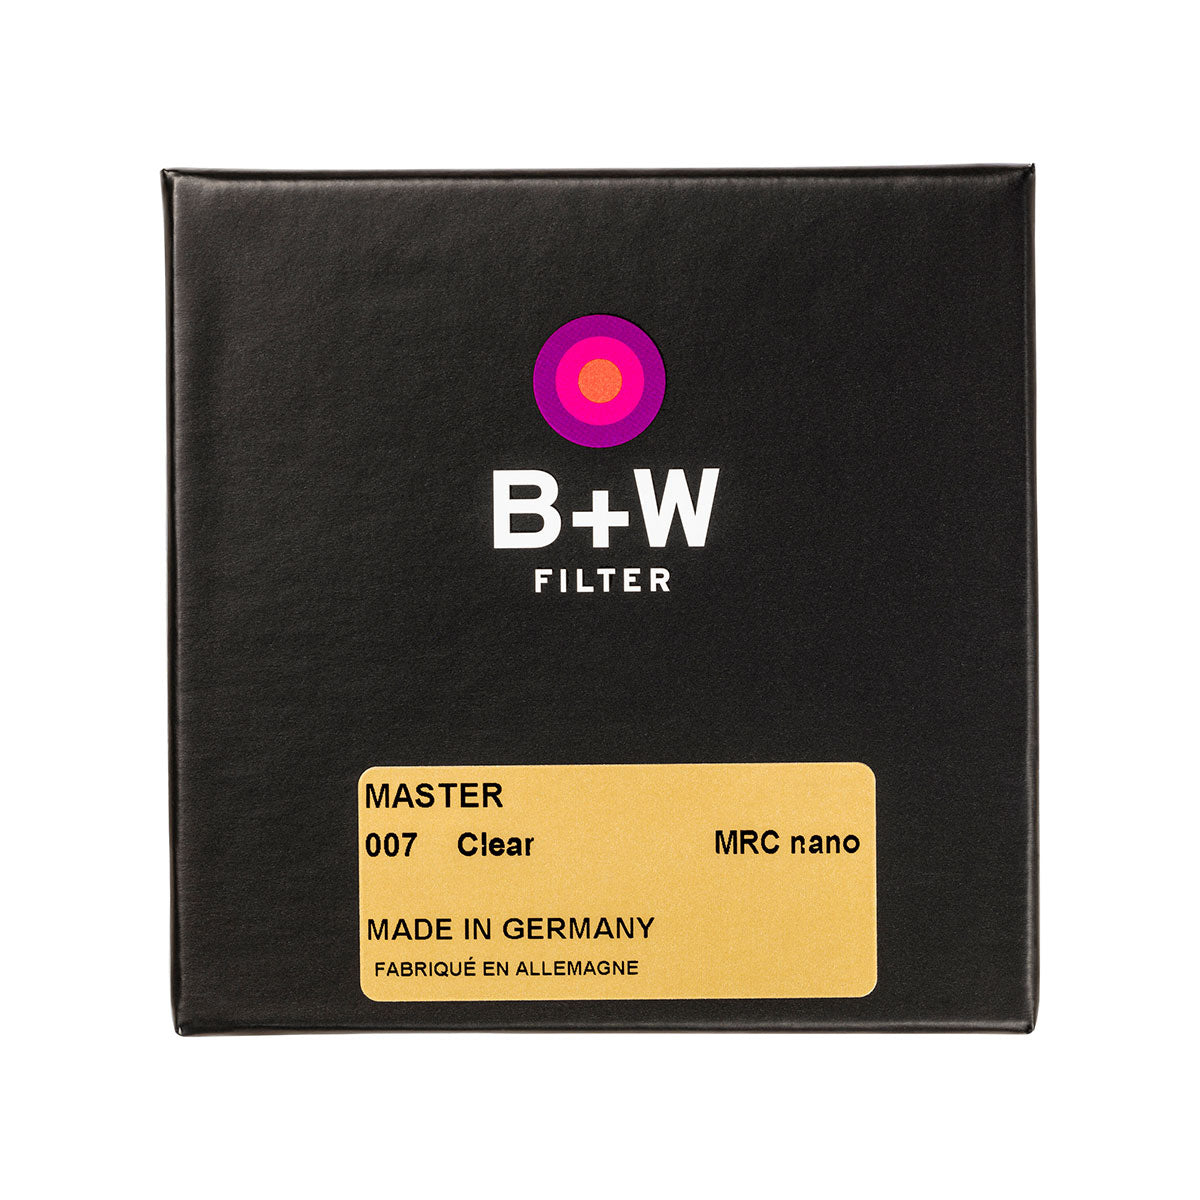 B+W Master 007 Clear Filter MRC Nano (Clear Filter 保護濾鏡) 濾鏡 Microworks Online Store